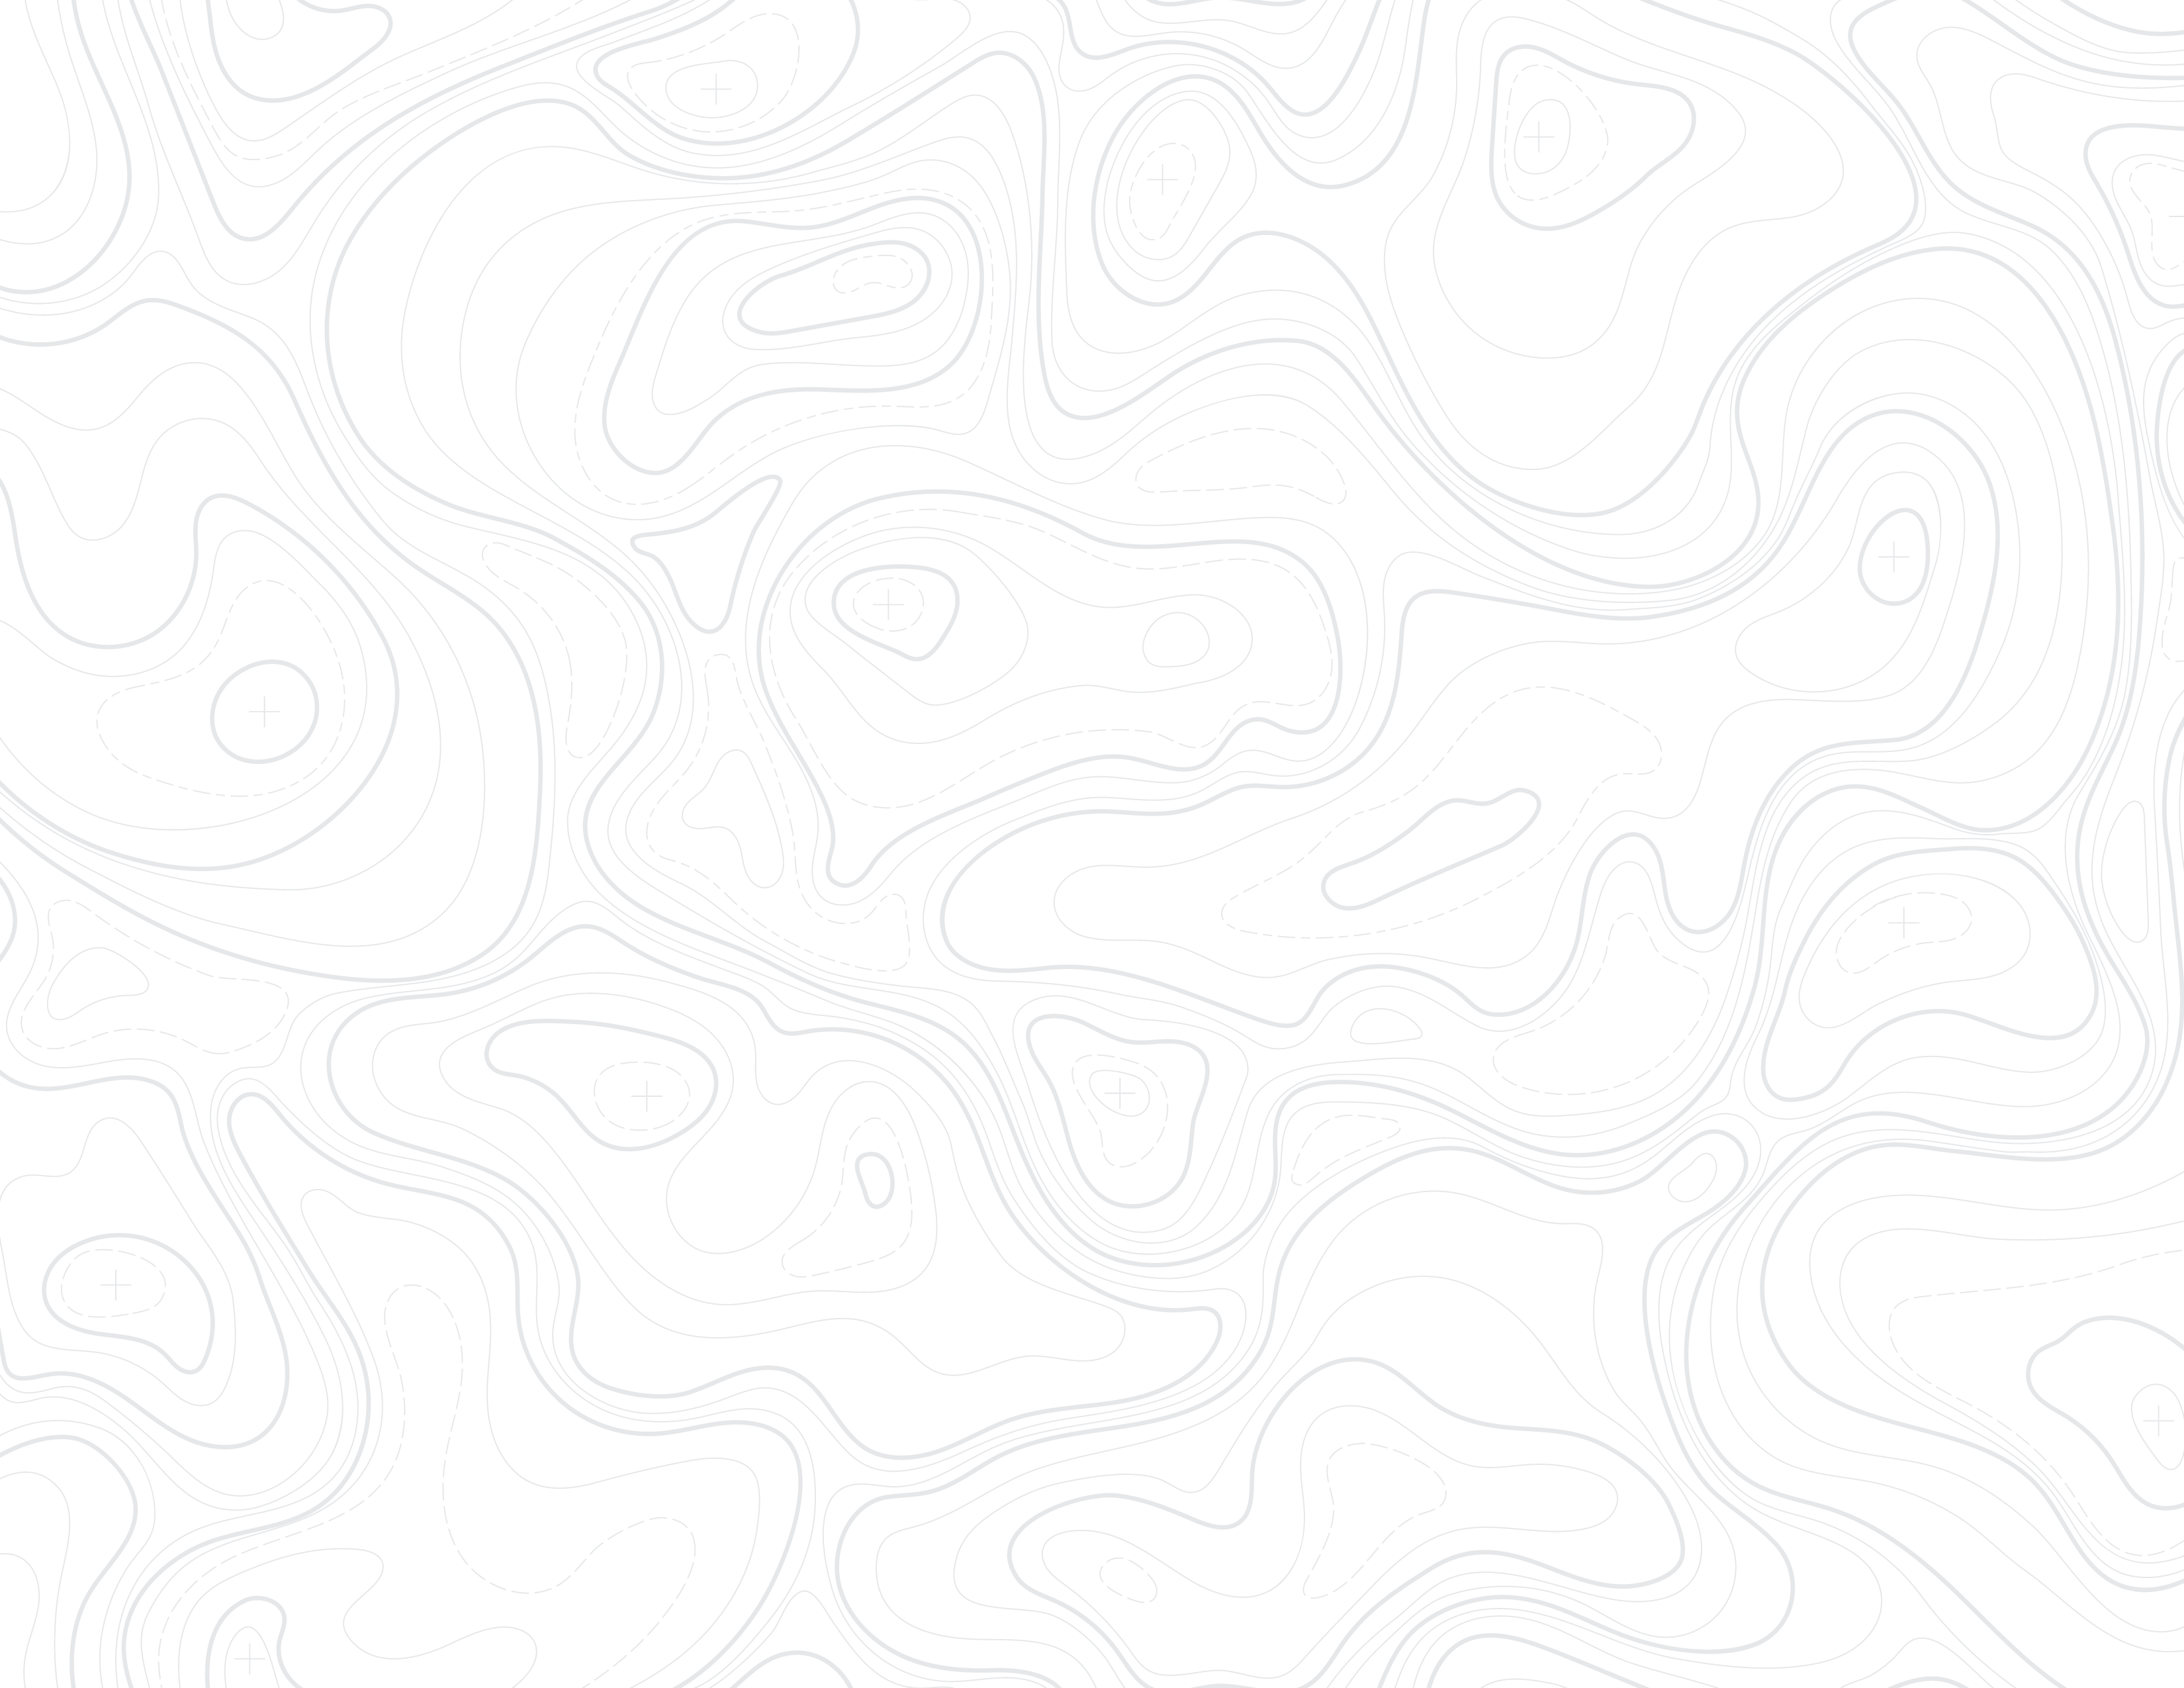 Background image of topography lines of a topography map